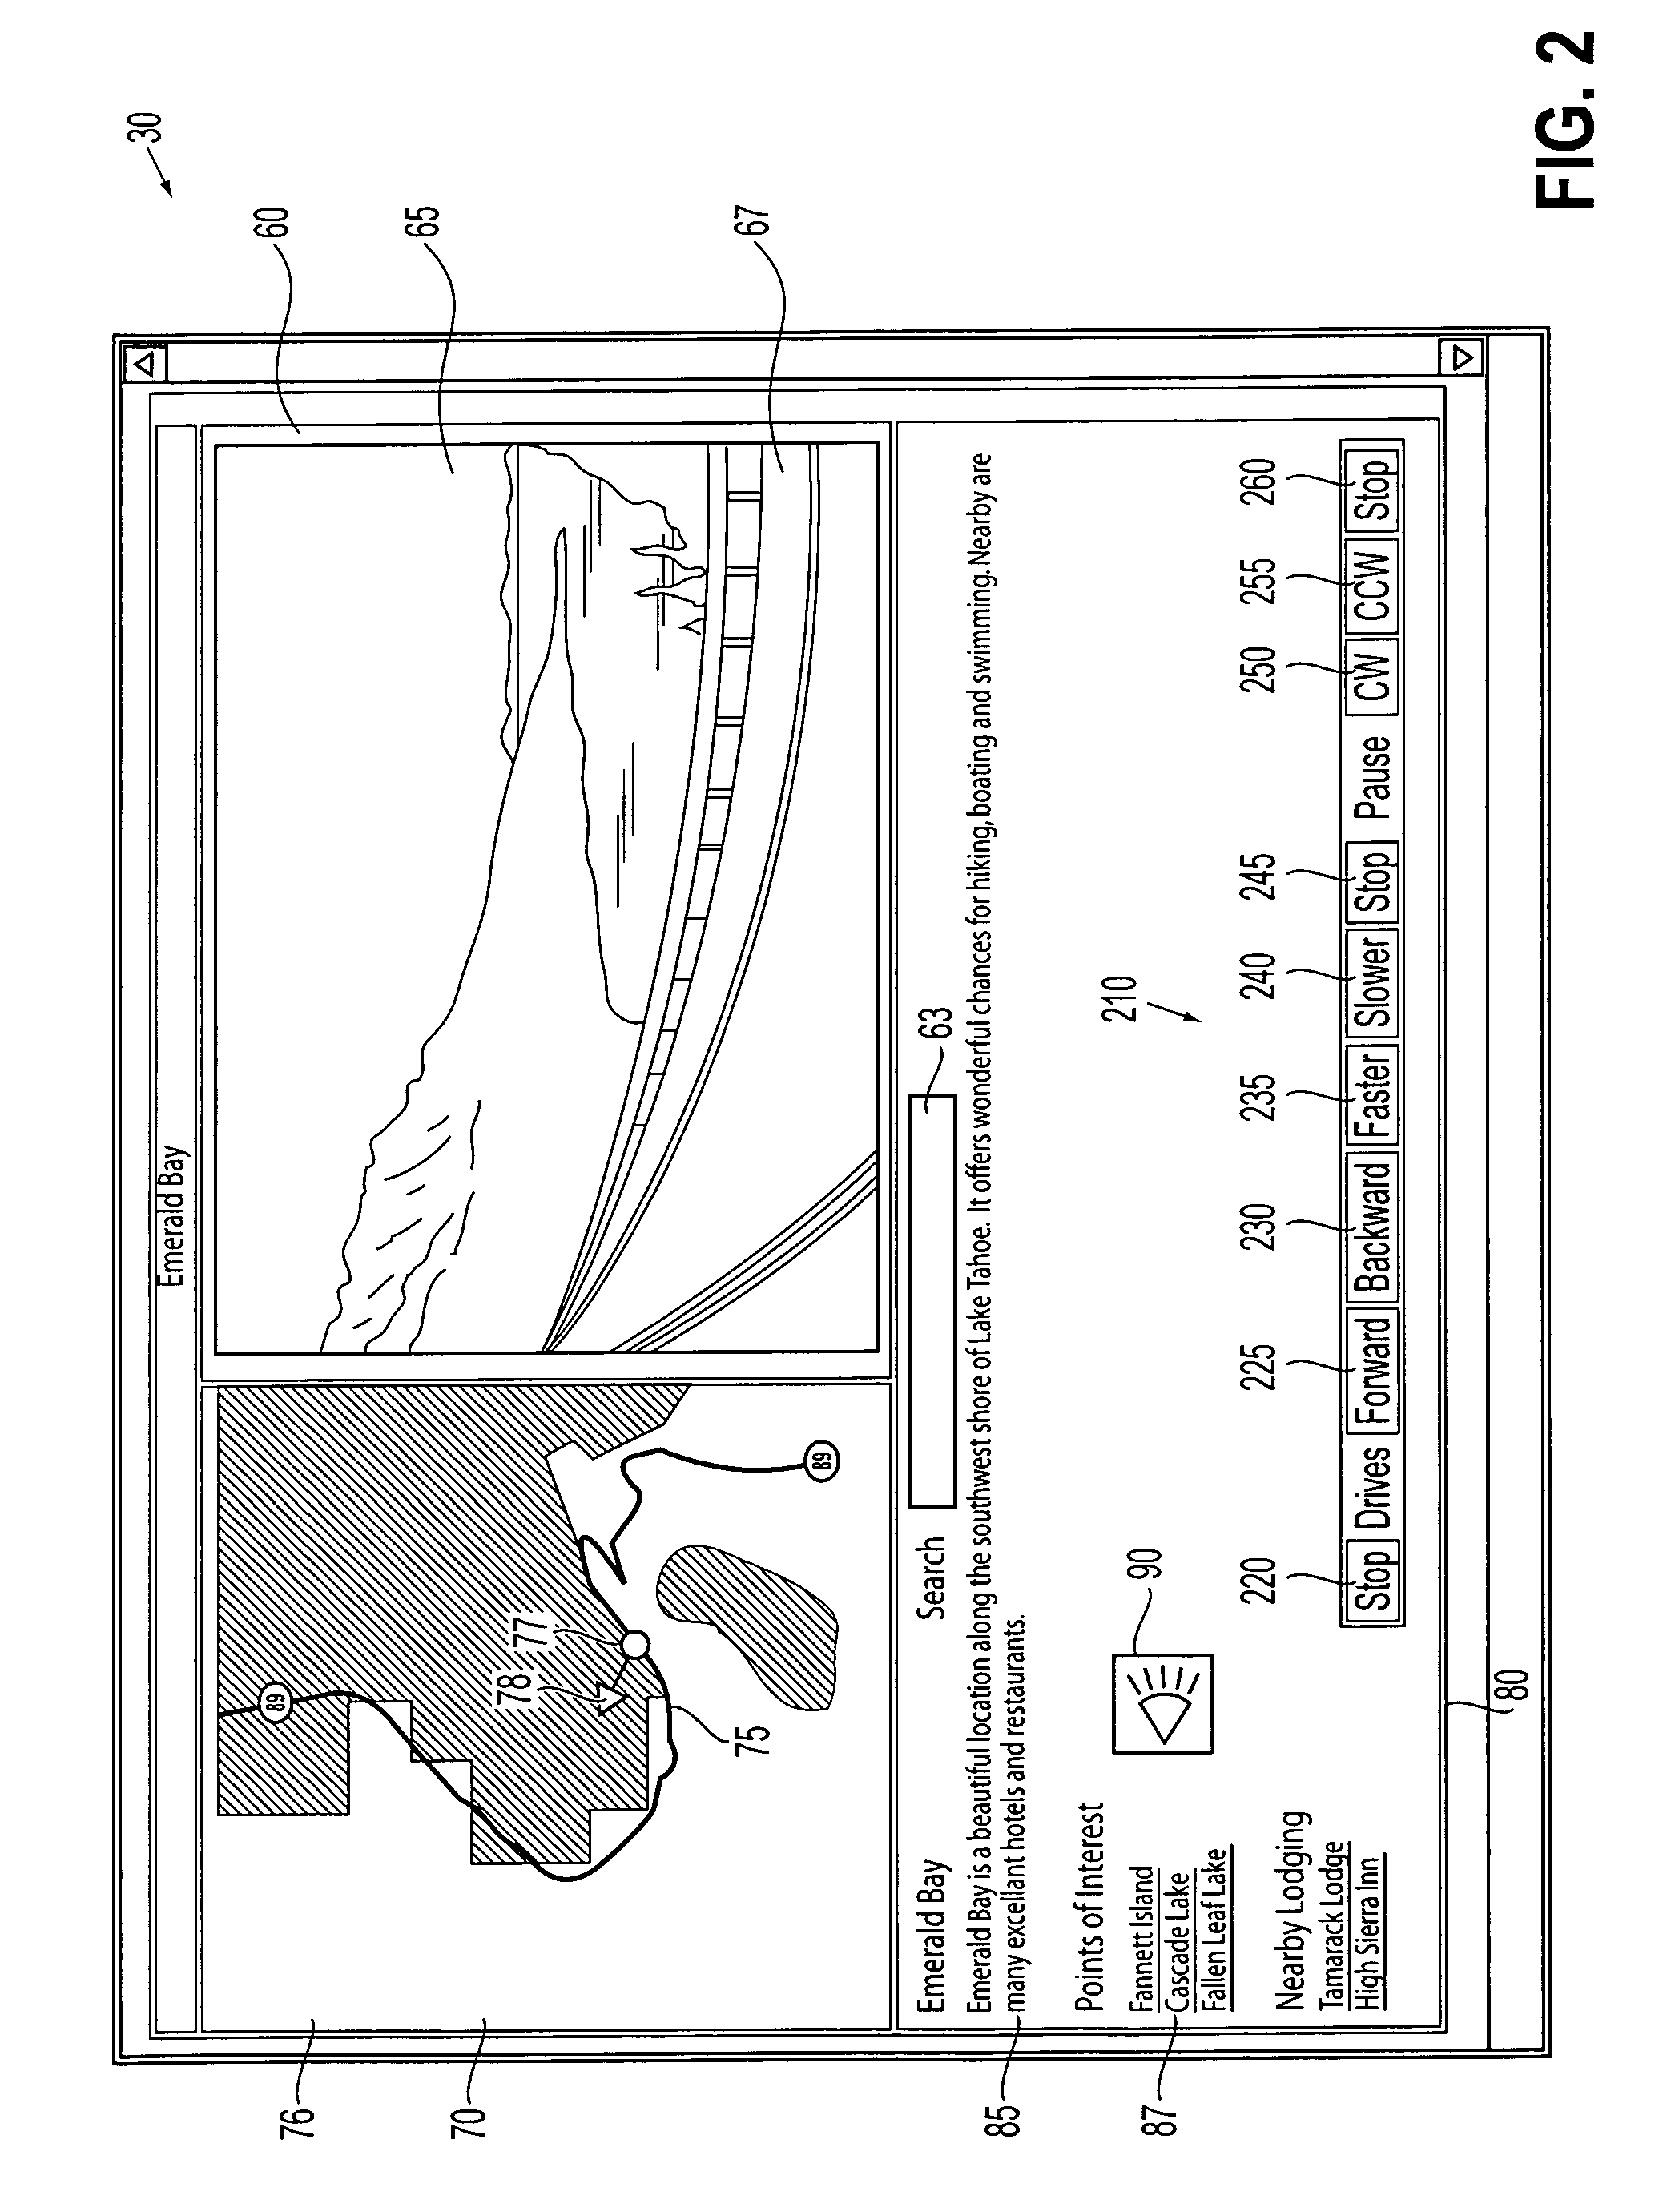 Systems and methods for providing a spatially indexed panoramic video